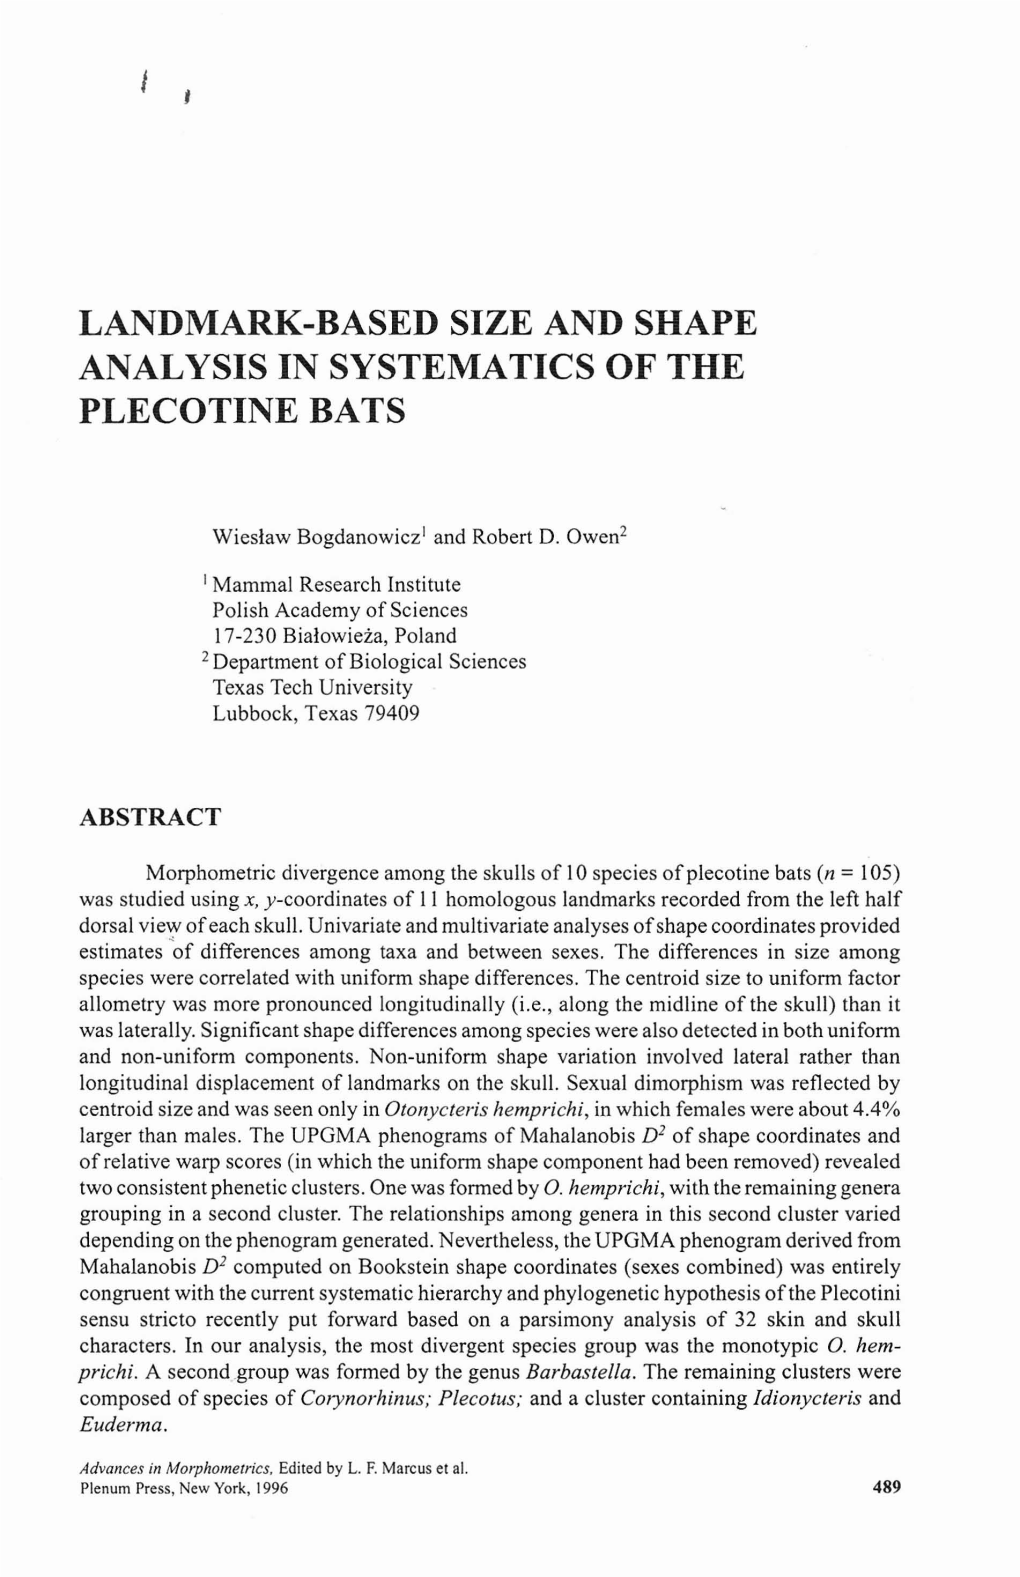 Landmark-Based Size and Shape Analysis in Systematics of the Plecotine Bats